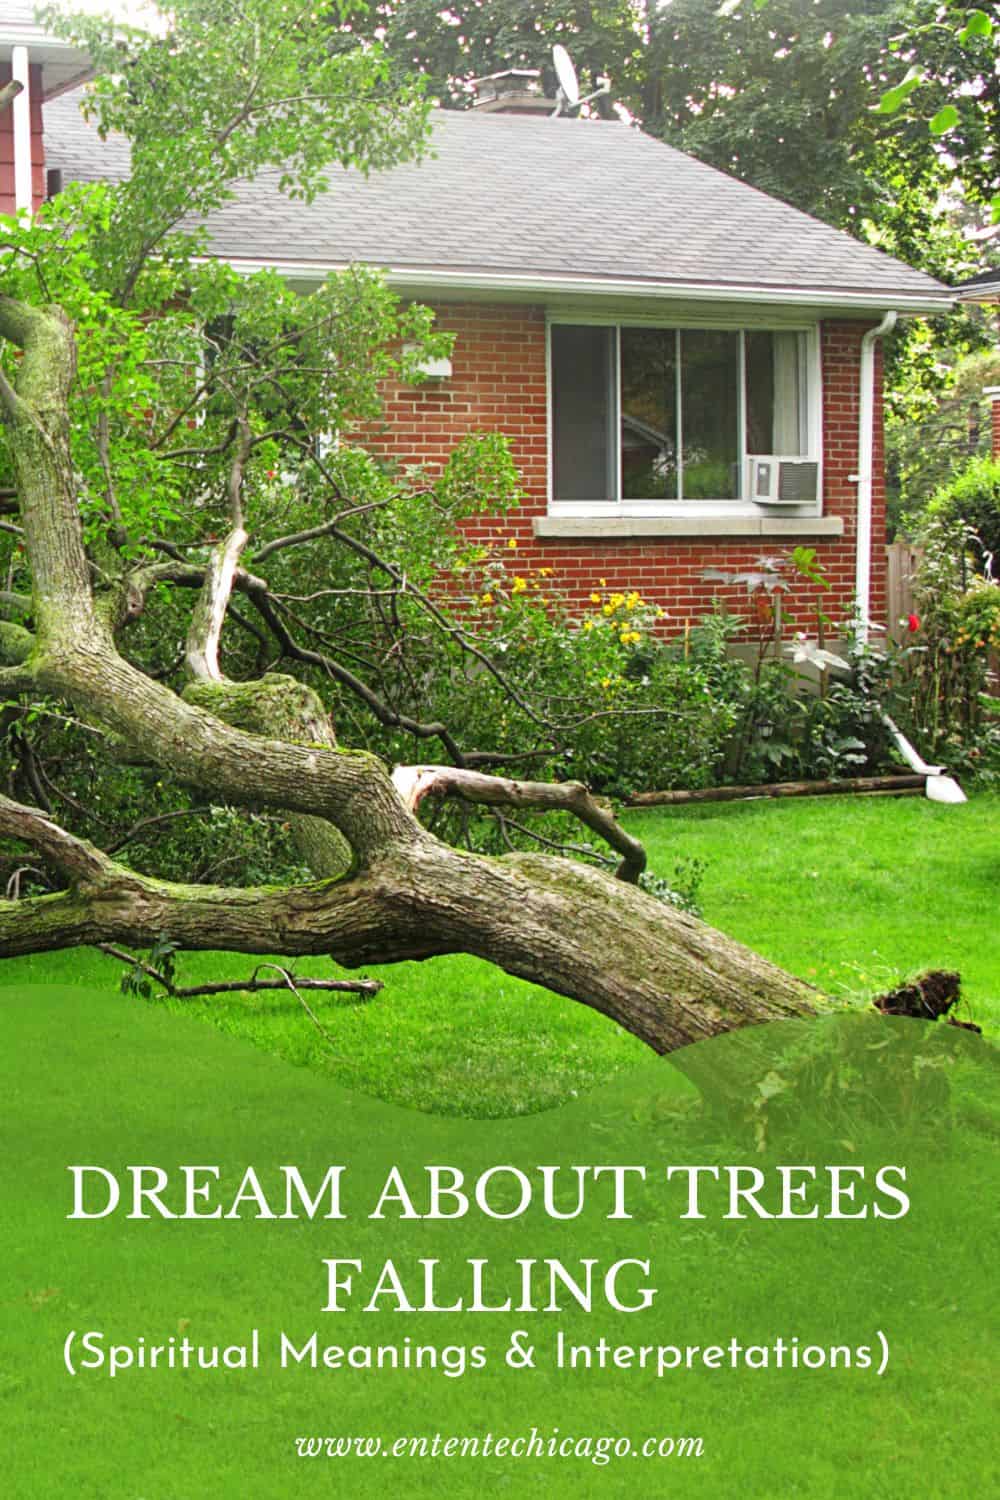 Dream About Trees Falling (Spiritual Meanings & Interpretations)